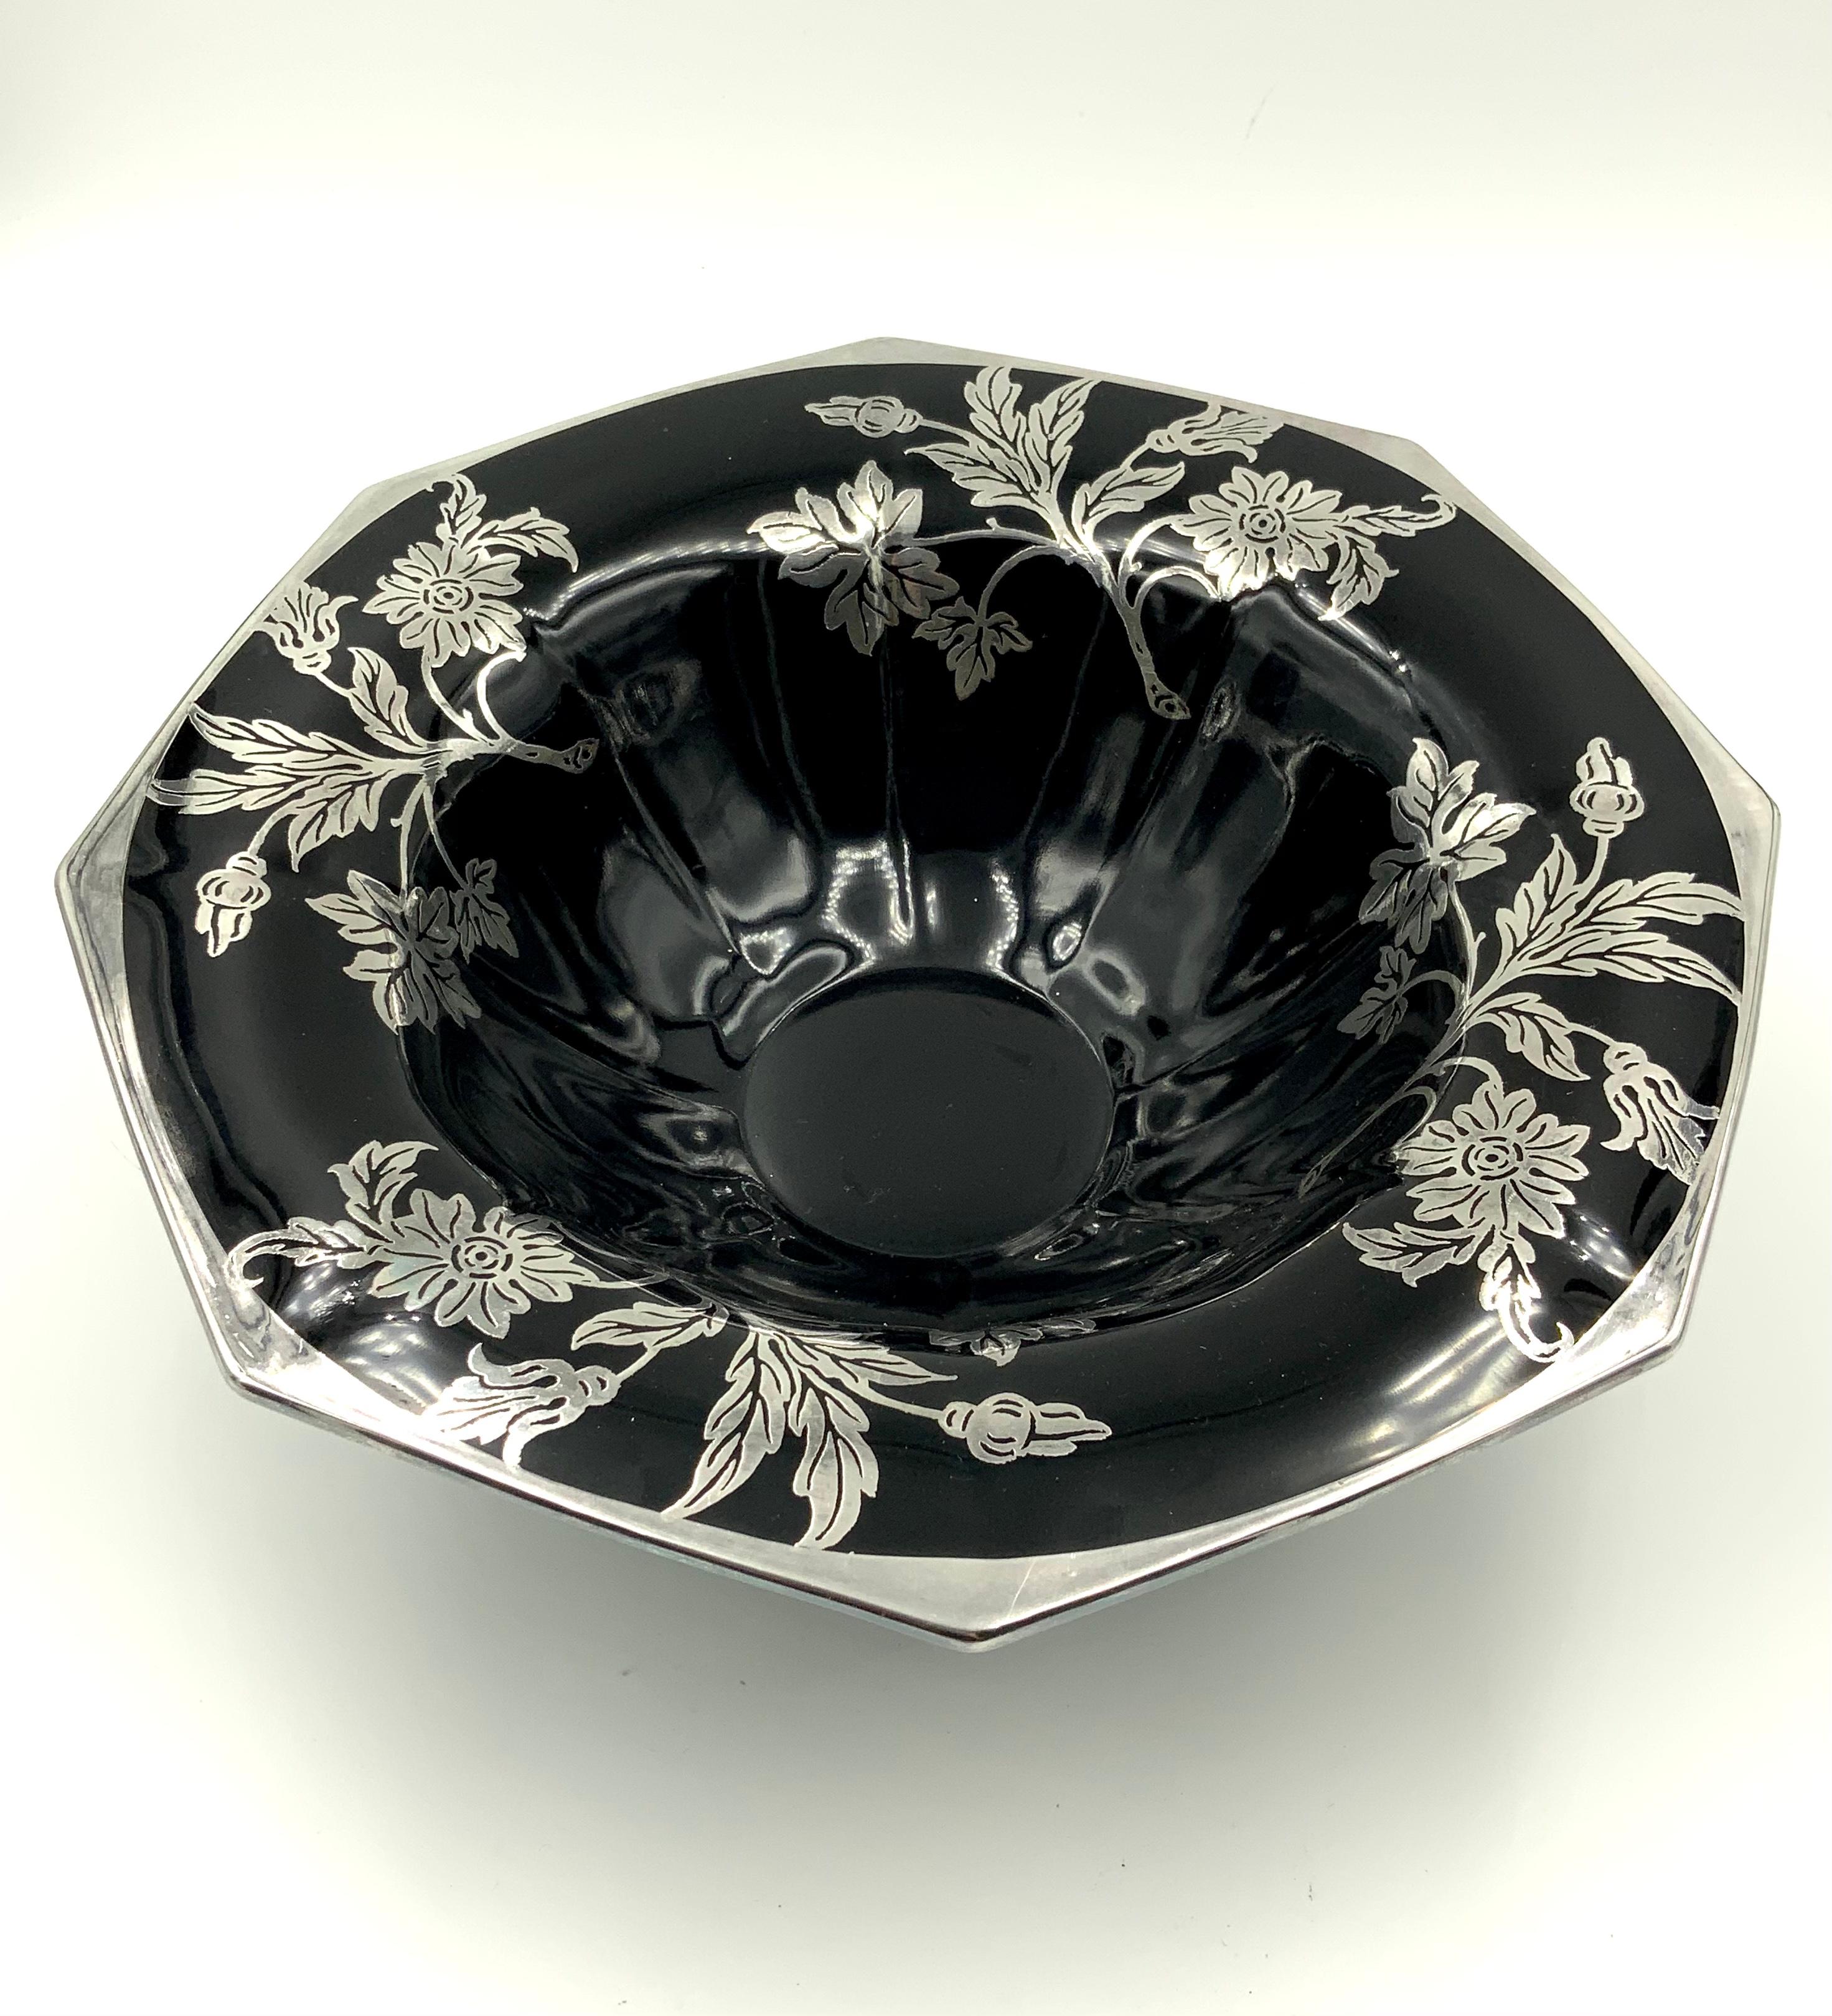 Flower and Leaf Silver Overlay Black Glass Octagonal Footed Bowl In Good Condition For Sale In Miami Beach, FL